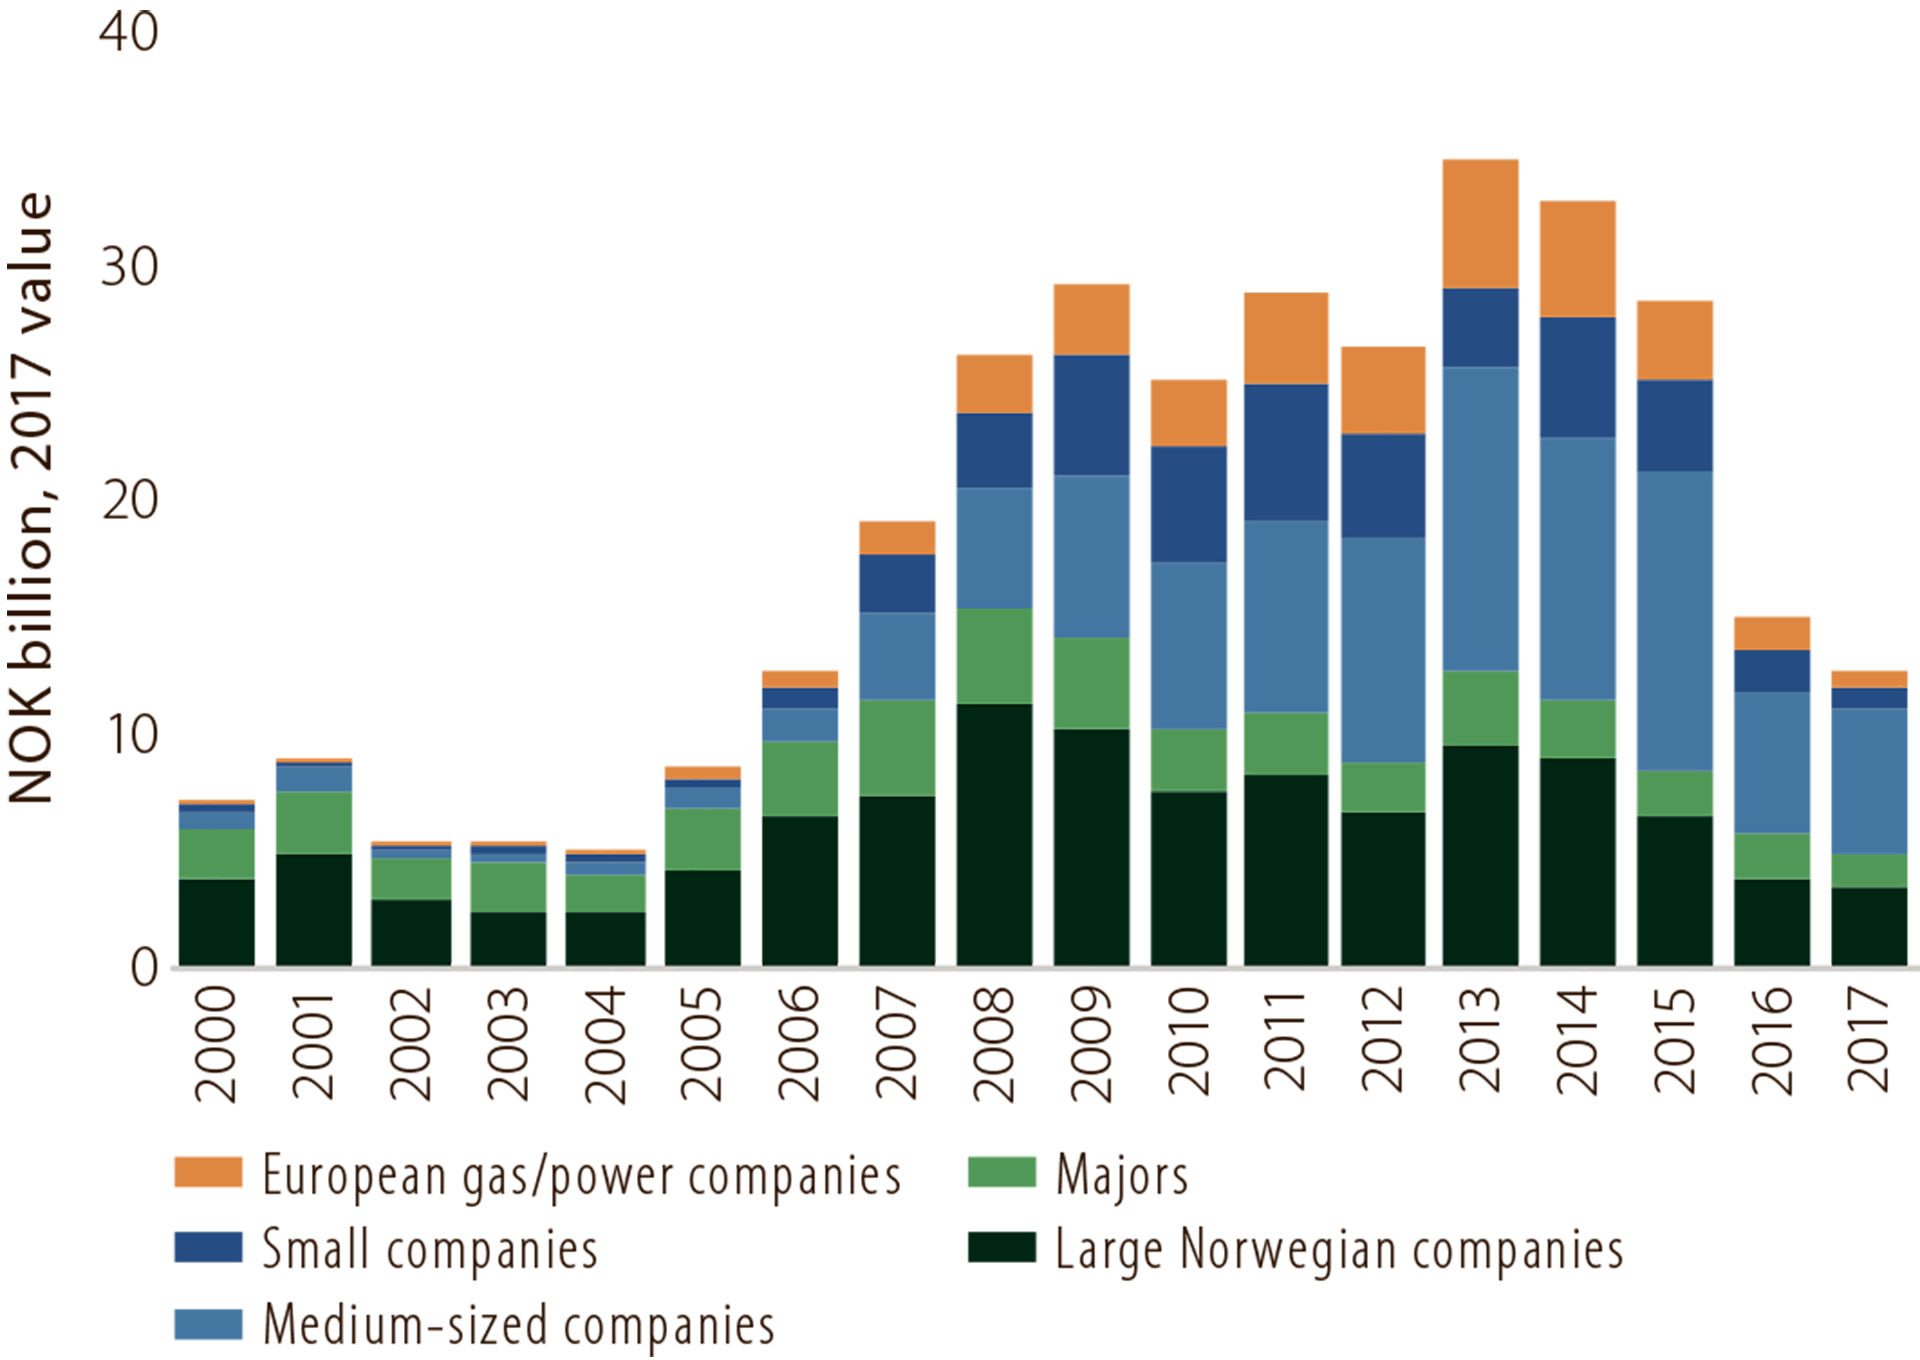 Figure 5.7 Investment in exploration in 2000-17 by company category (licensees).